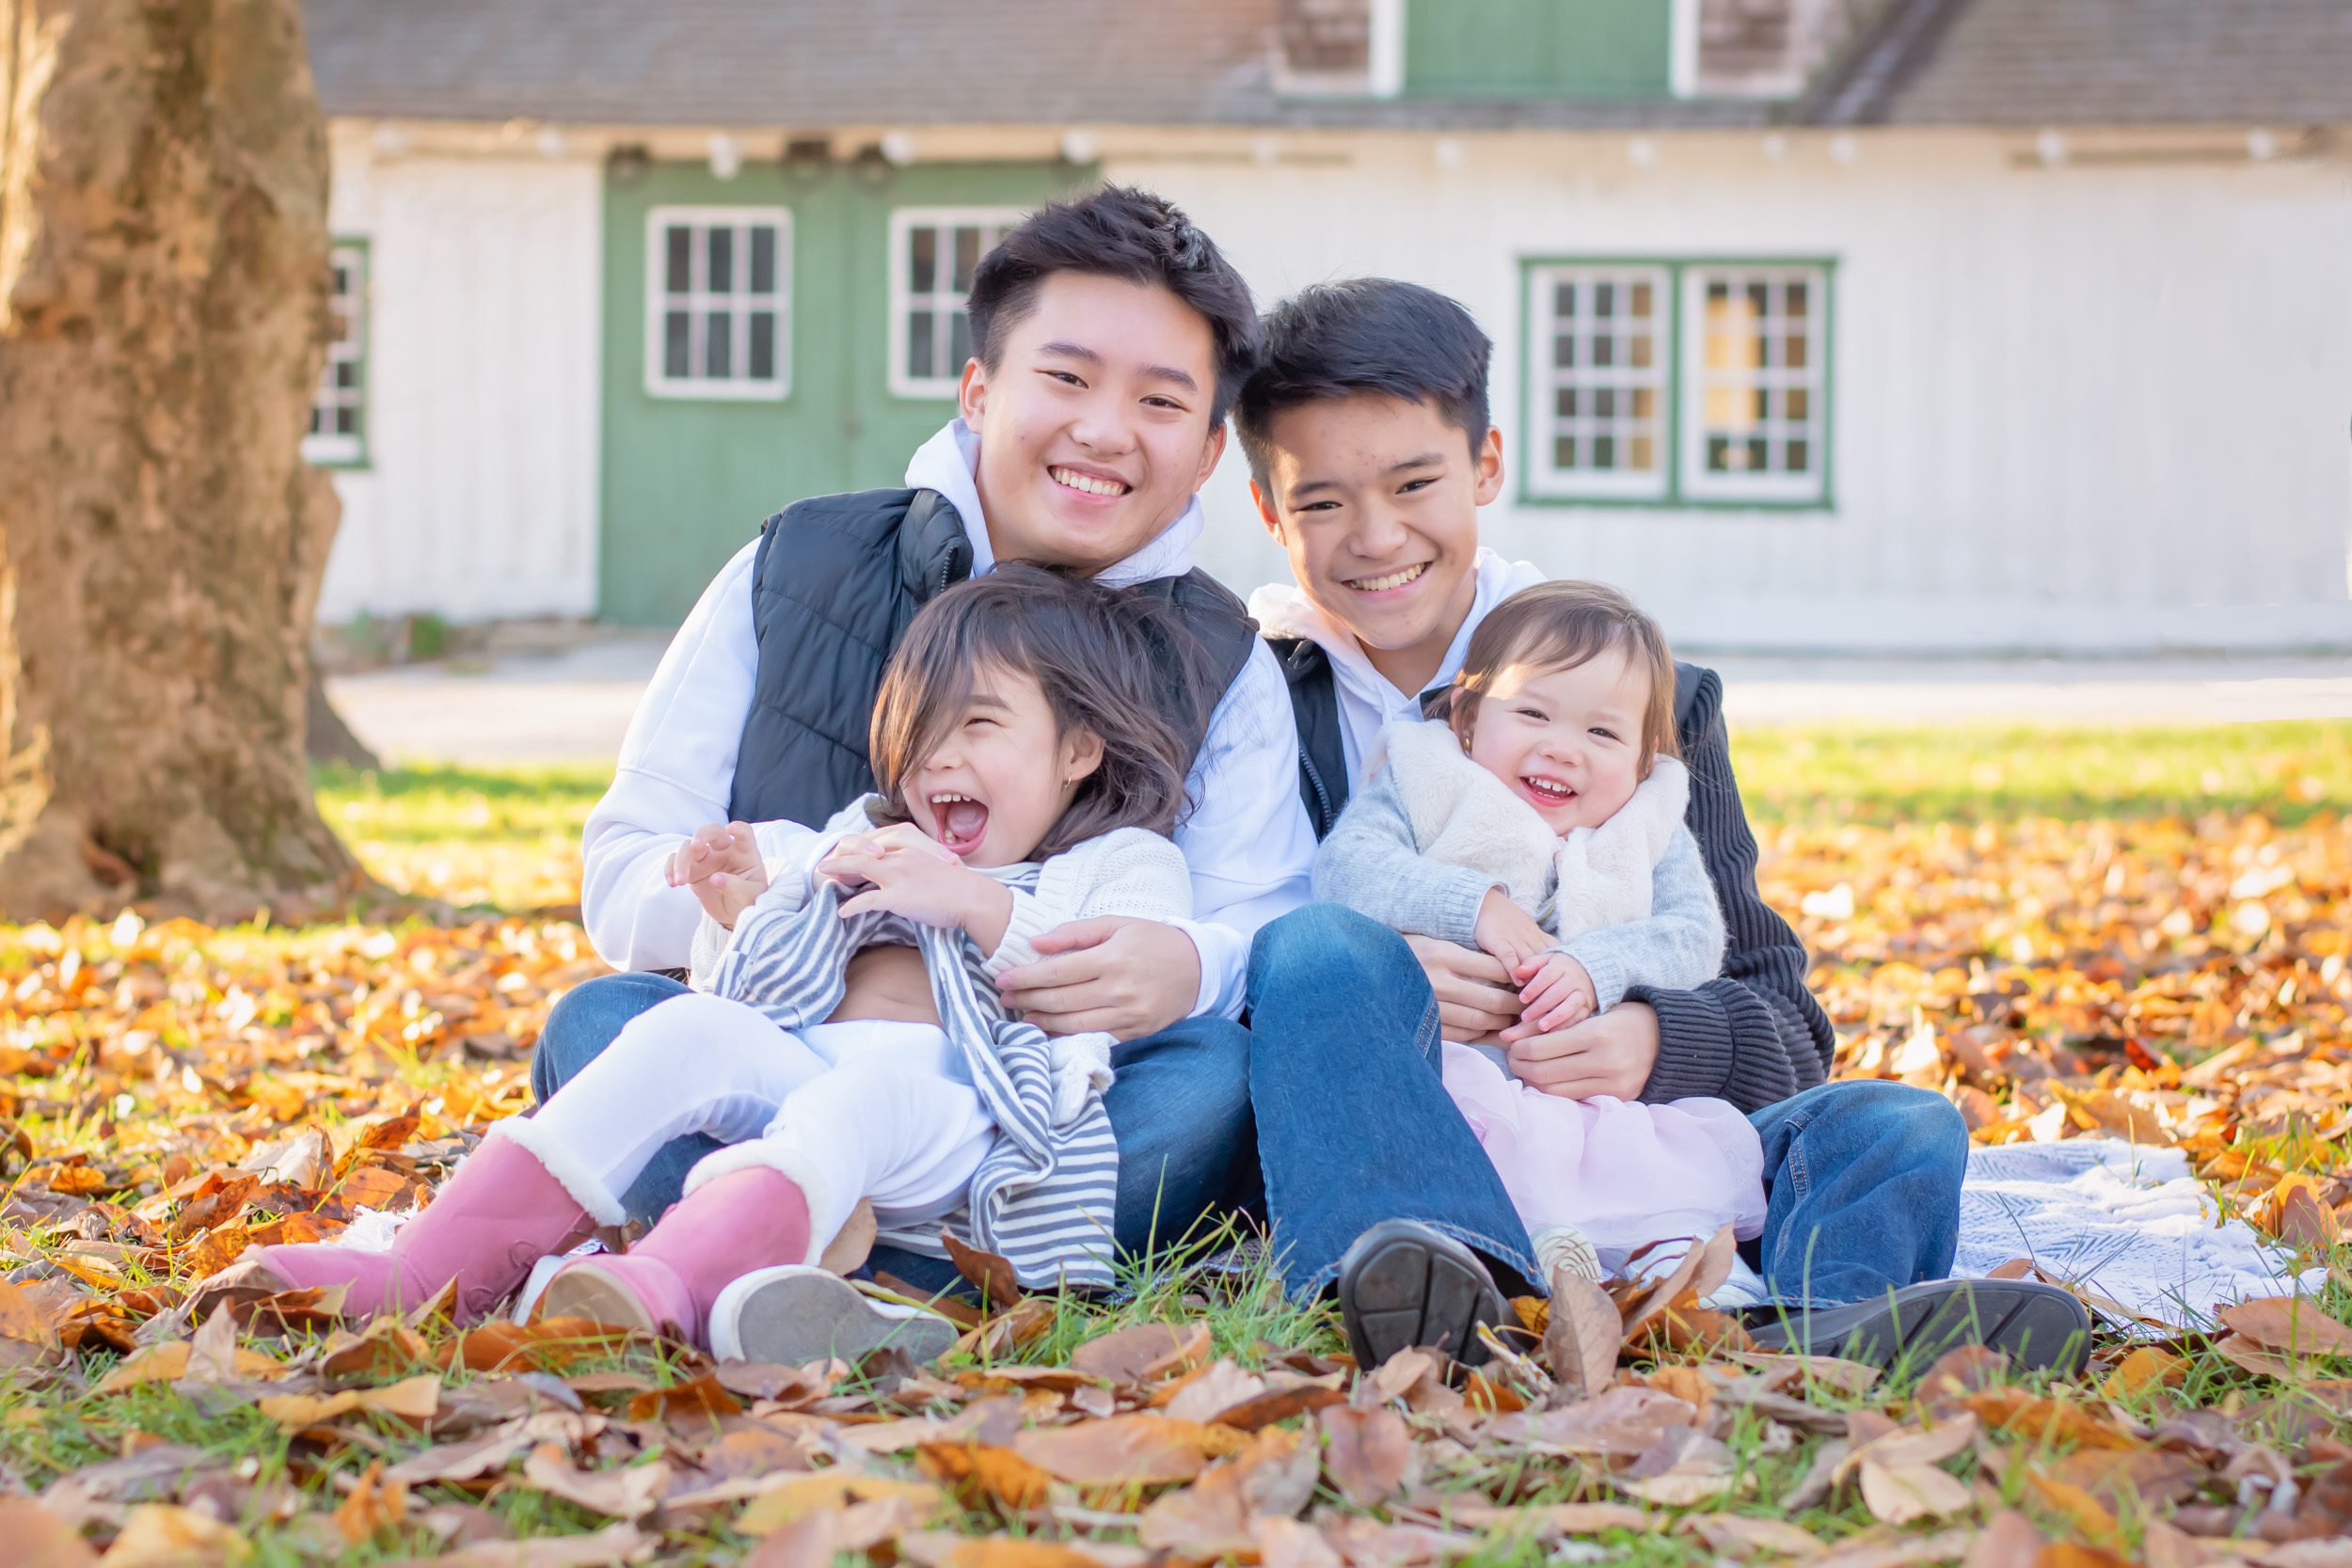 Cousins sitting in a field of leaves snuggling and laughing with a green and white barn in the background during an extended family photo session